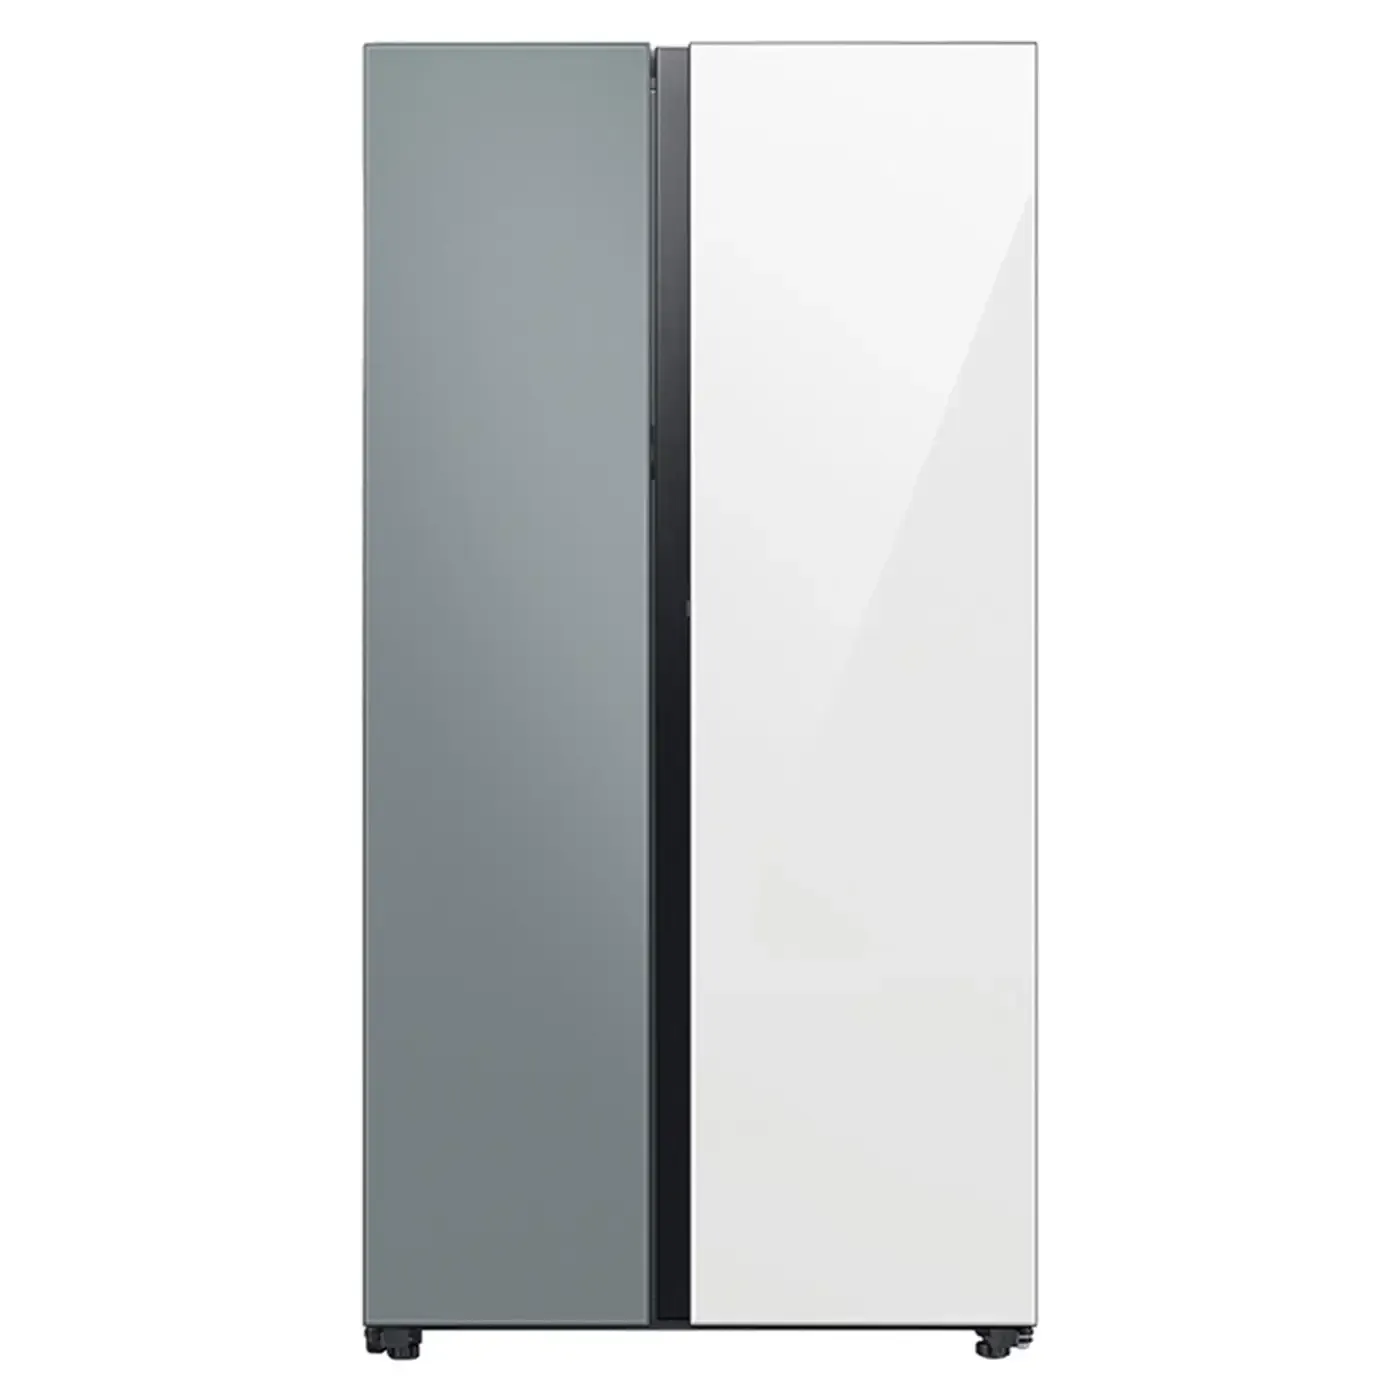 Nevecón SAMSUNG Bespoke Side by Side No Frost 793 litros brutos RS28CB760A7GCO blanco y gris